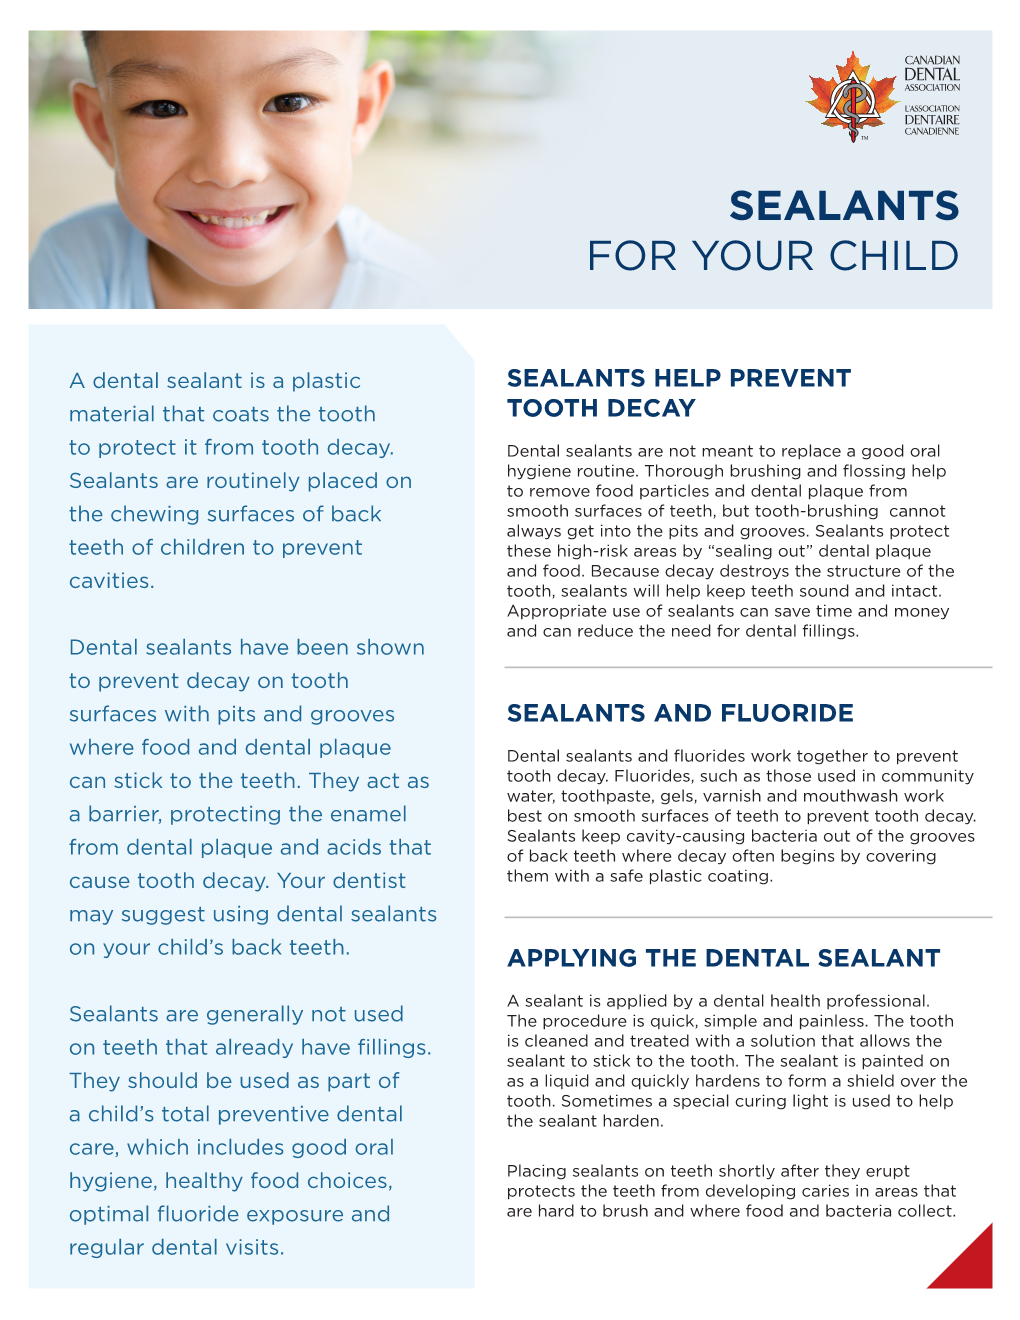 Sealants for Your Child